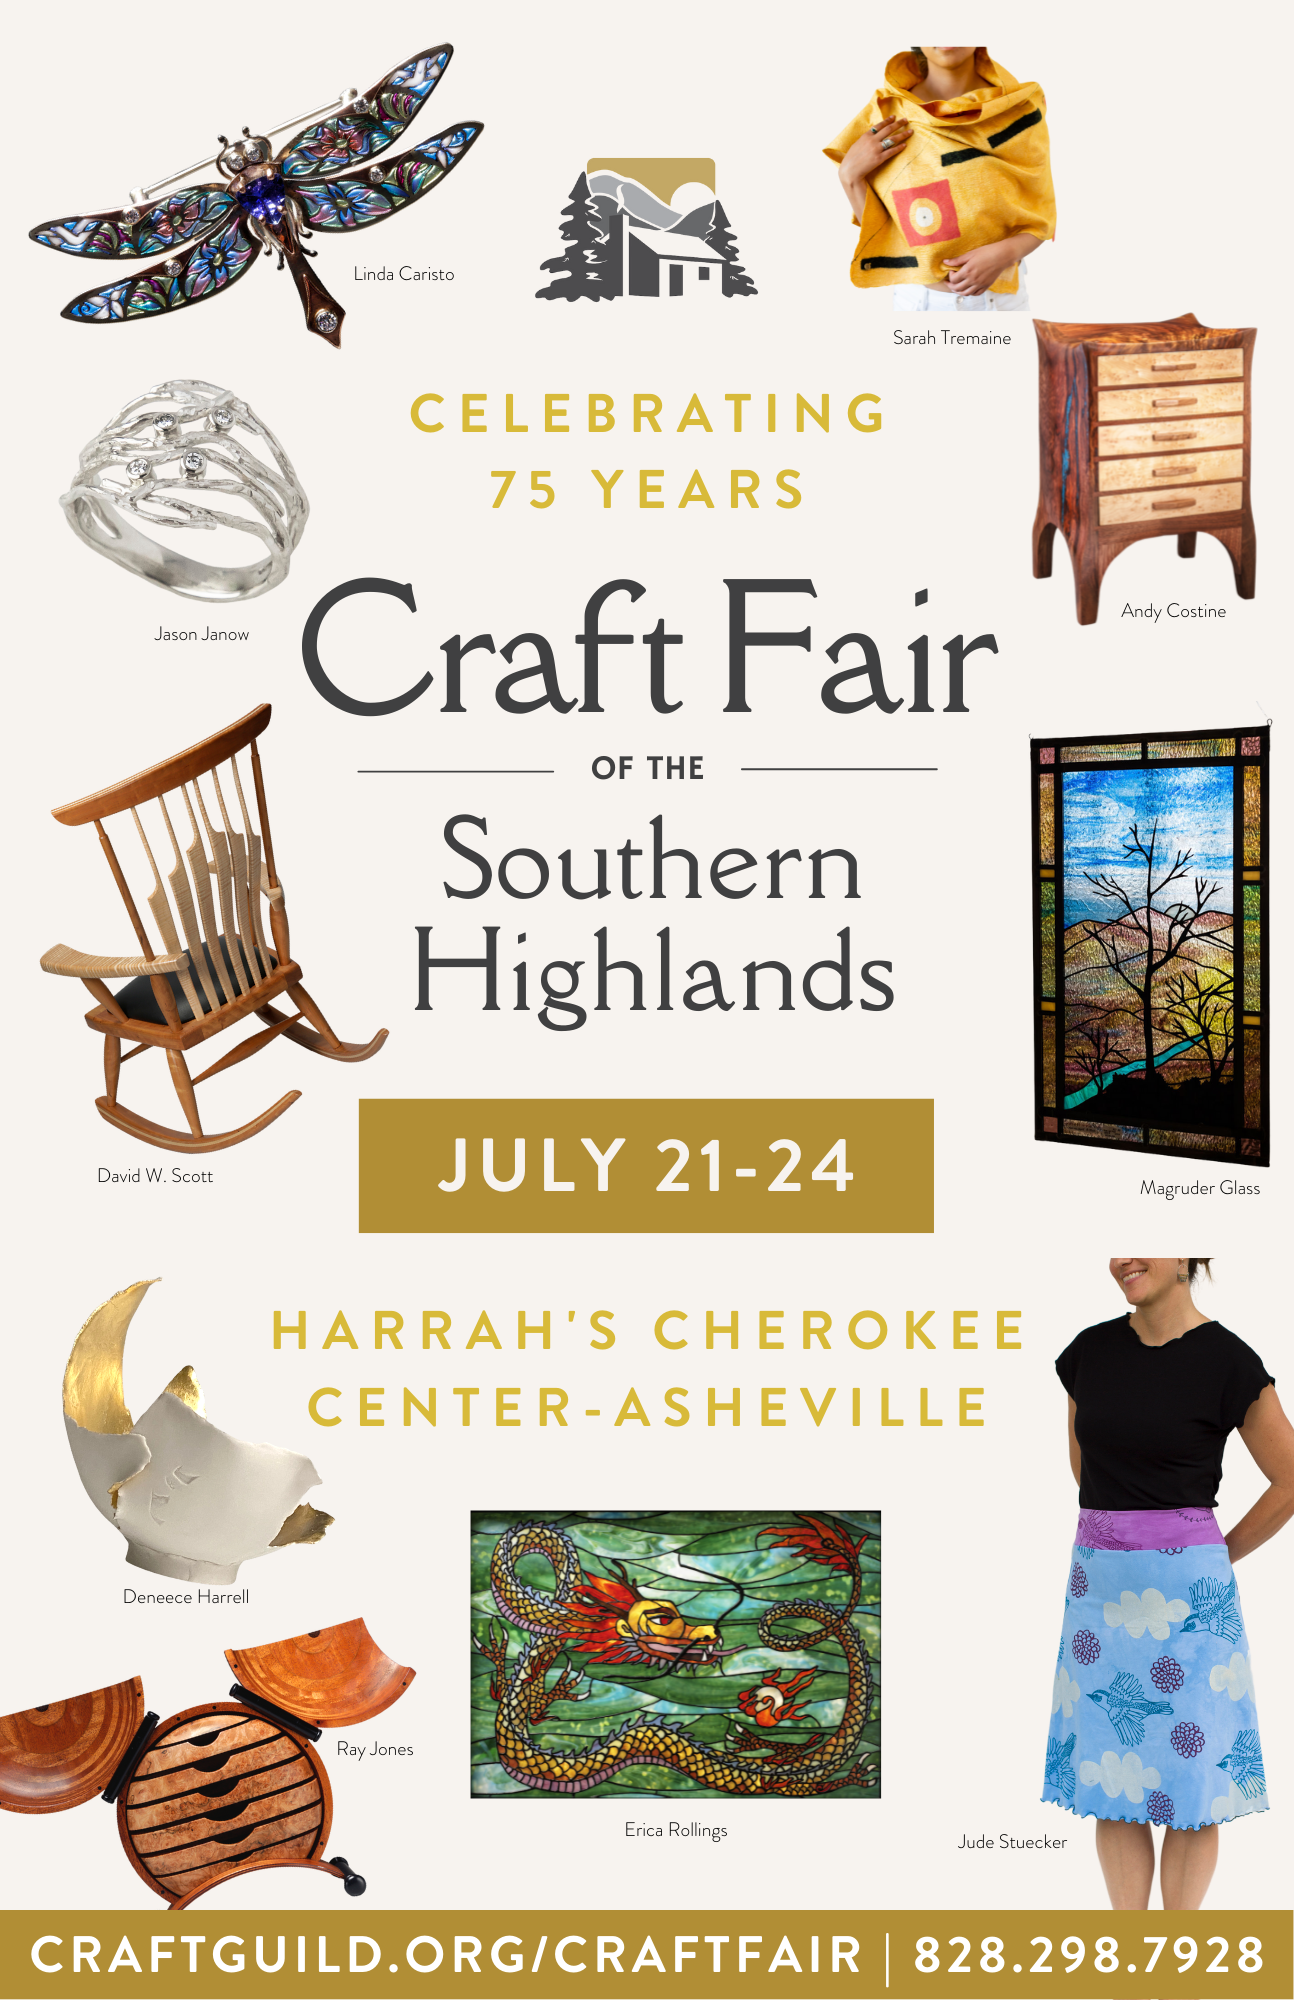 Craft Fair of the Southern Highlands – Blue Ridge National Heritage Area